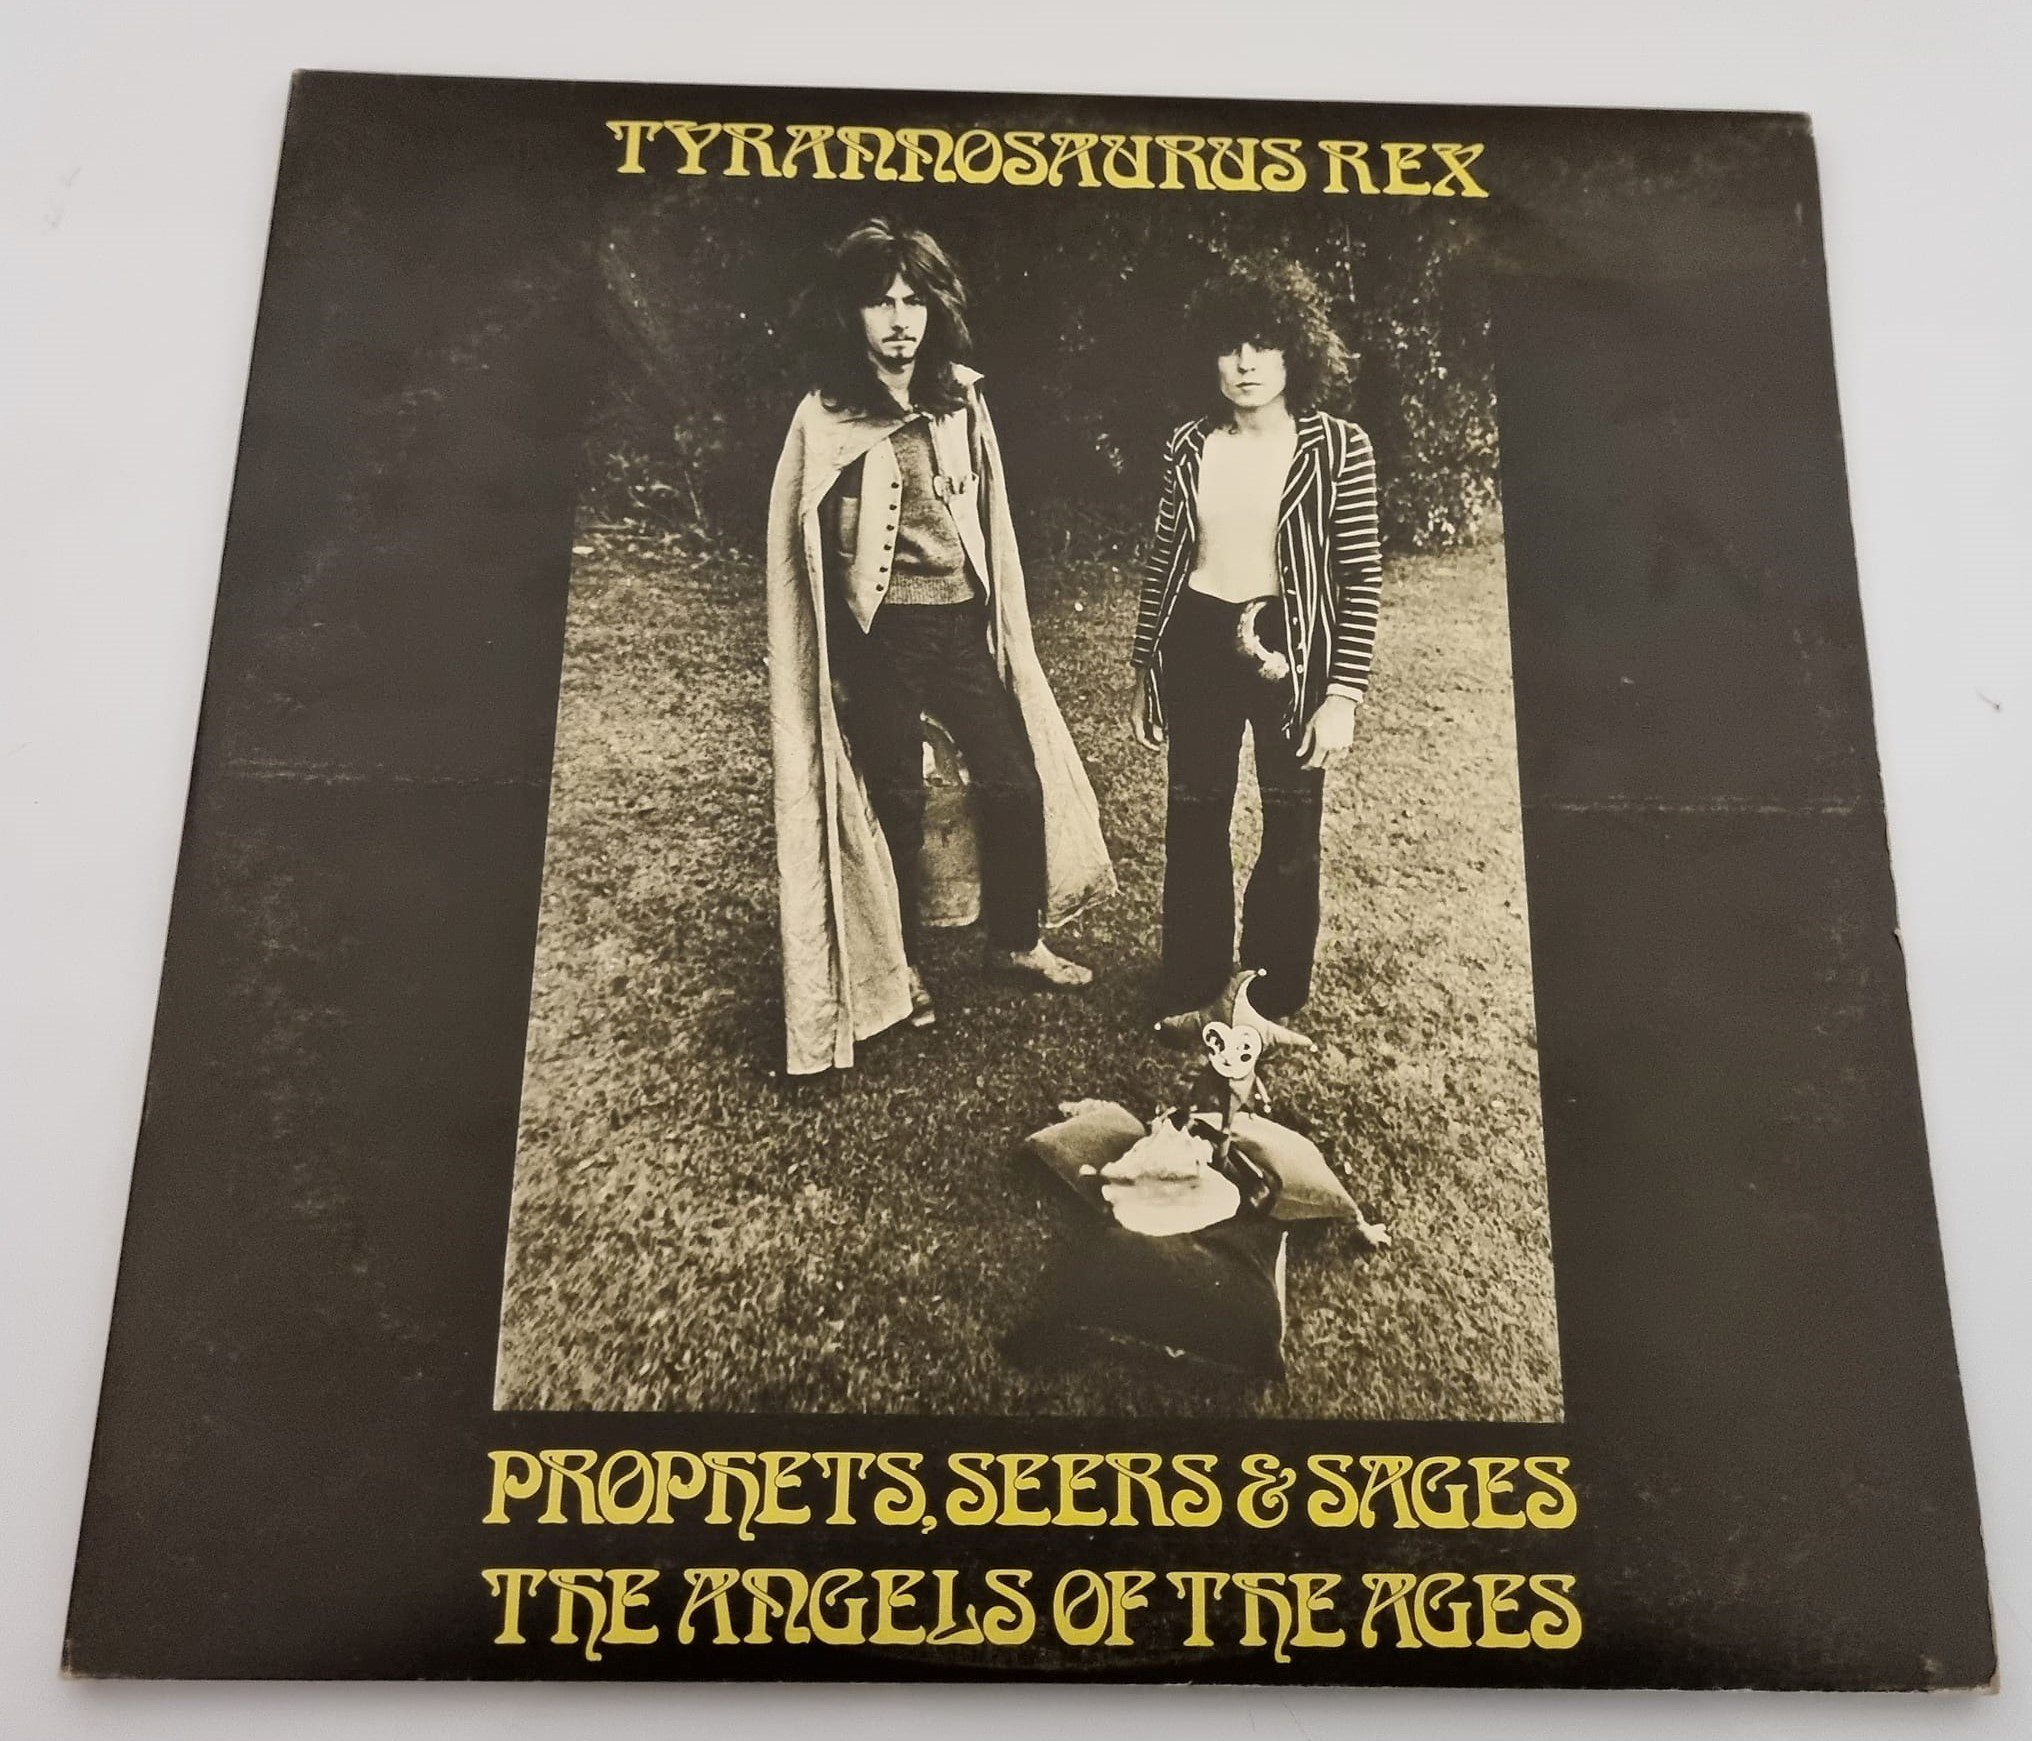 Buy this rare Tyrannosaurus Rex record by clicking here